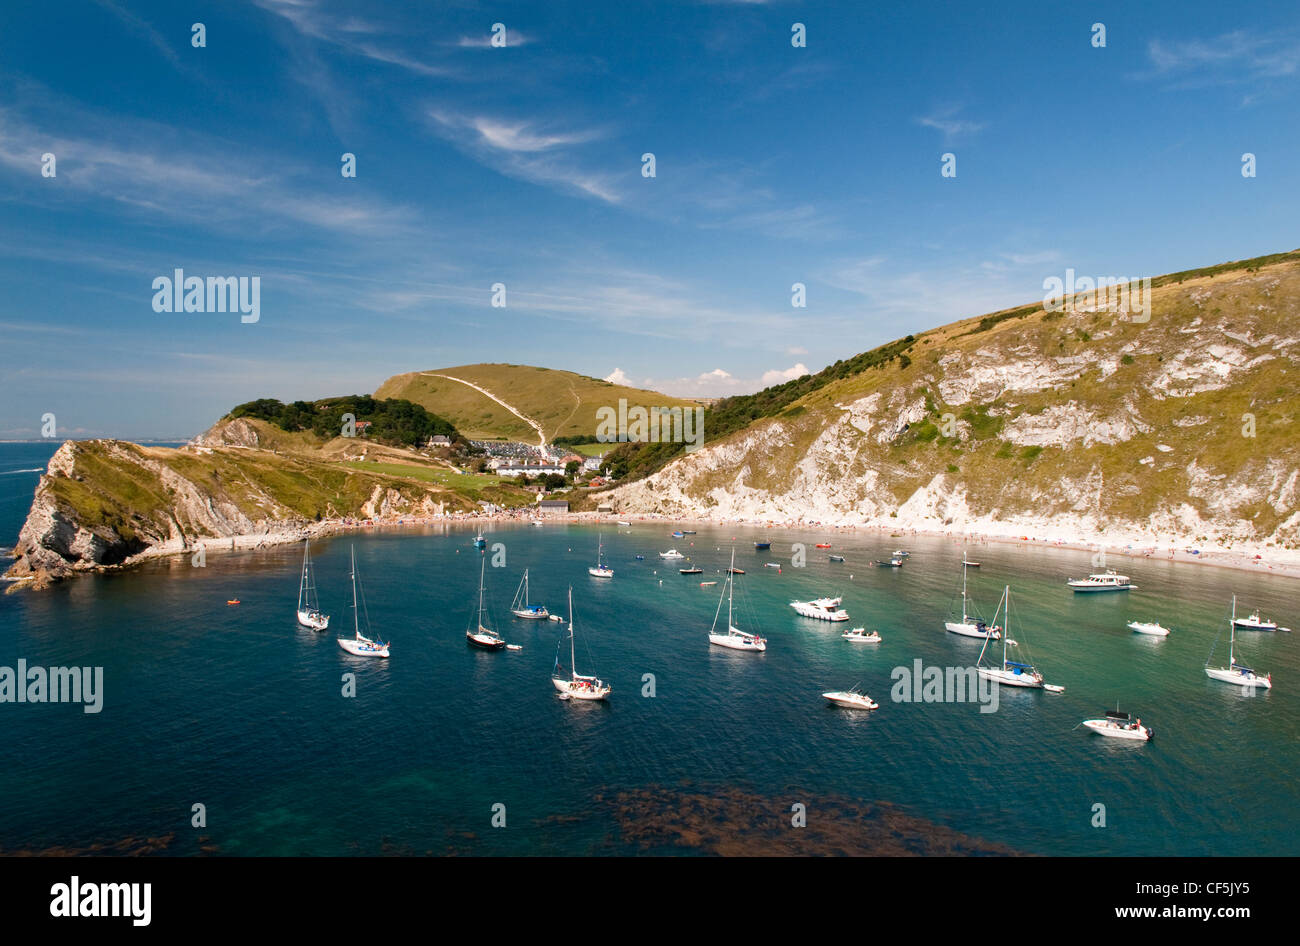 Boats moored in Lulworth Cove, on the Jurassic Coast World Heritage Site. Stock Photo